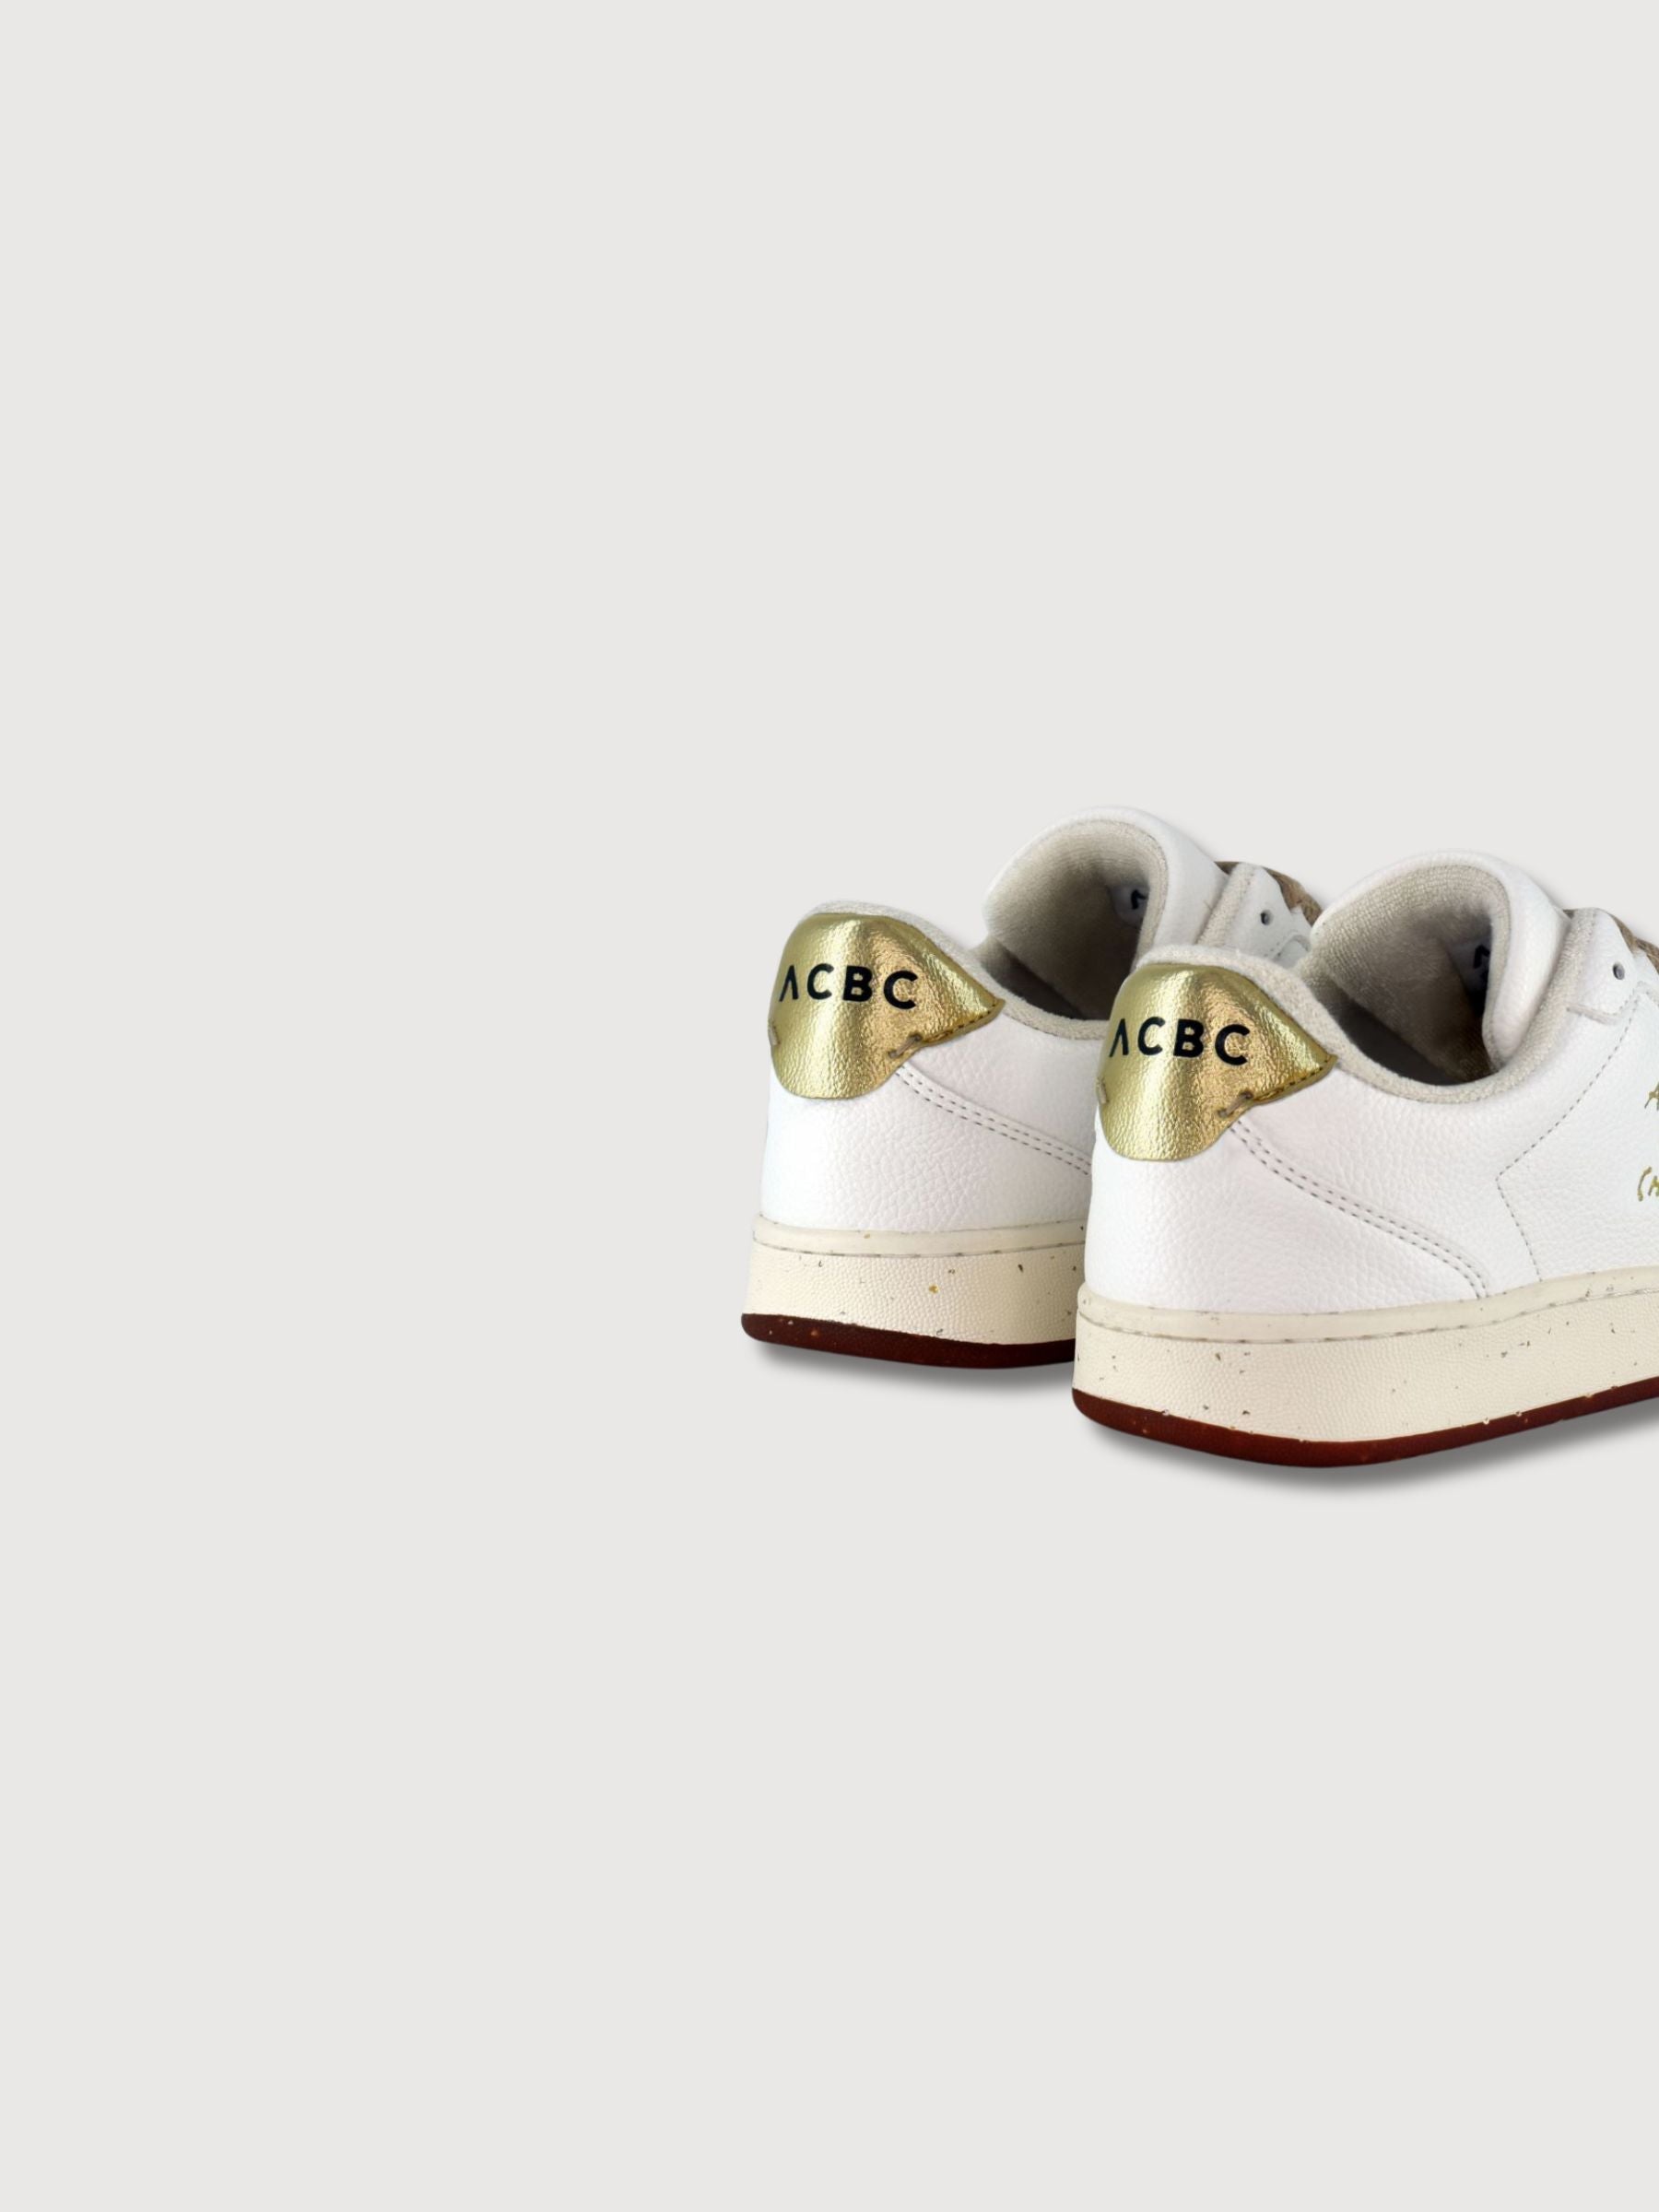 Sneakers "Evergreen" White-Gold Vegan Leather | ACBC